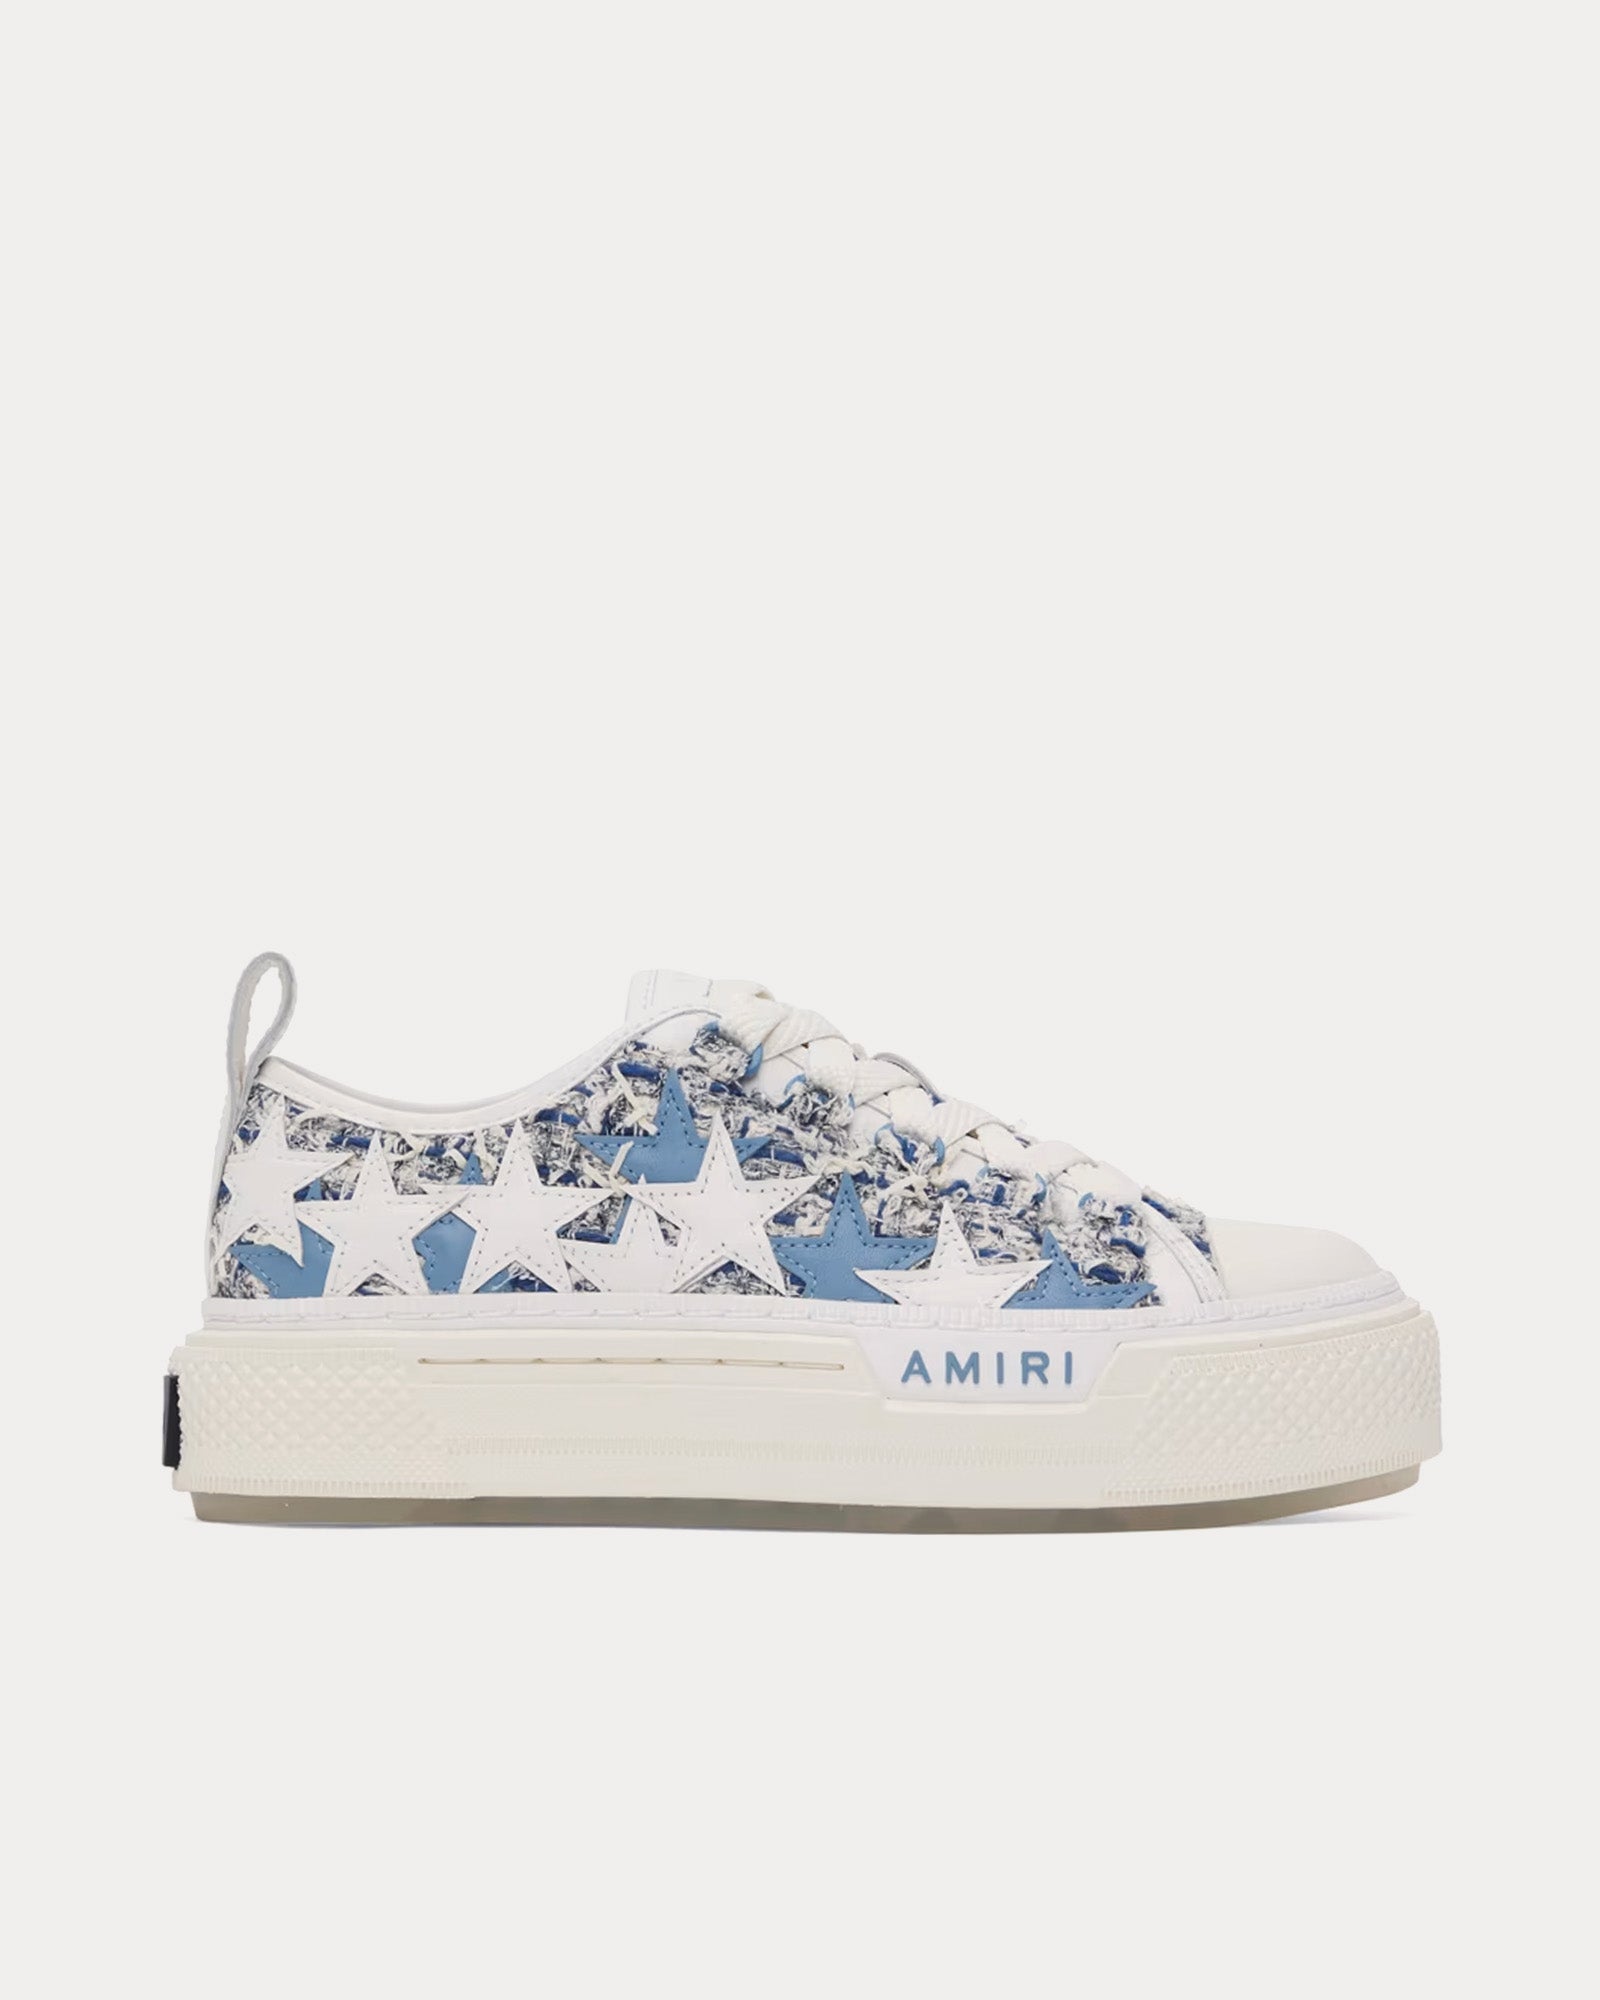 AMIRI - Stars Court Boucle White / Blue Low Top Sneakers